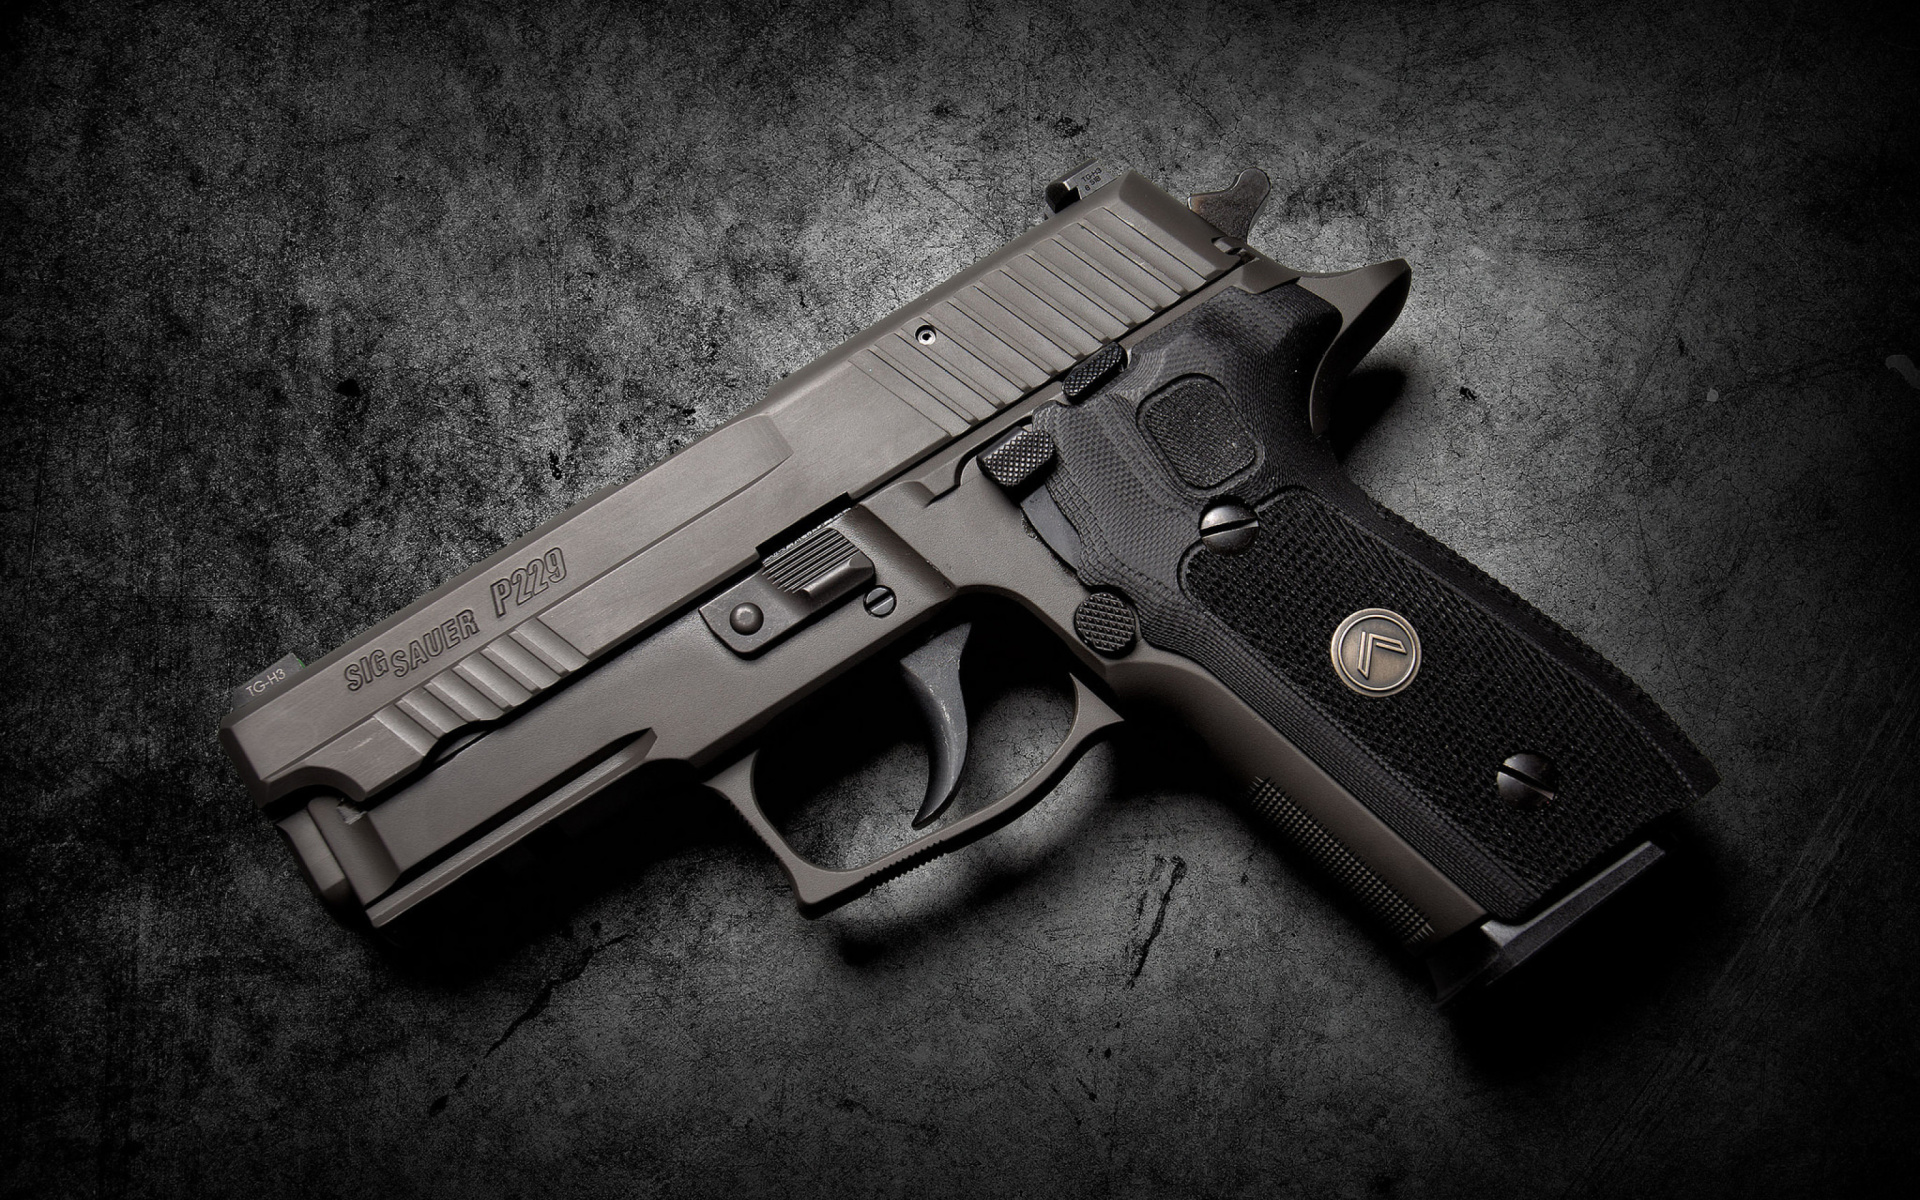 Sig Sauer Sigarms Pistols P229 Wallpaper For Widescreen